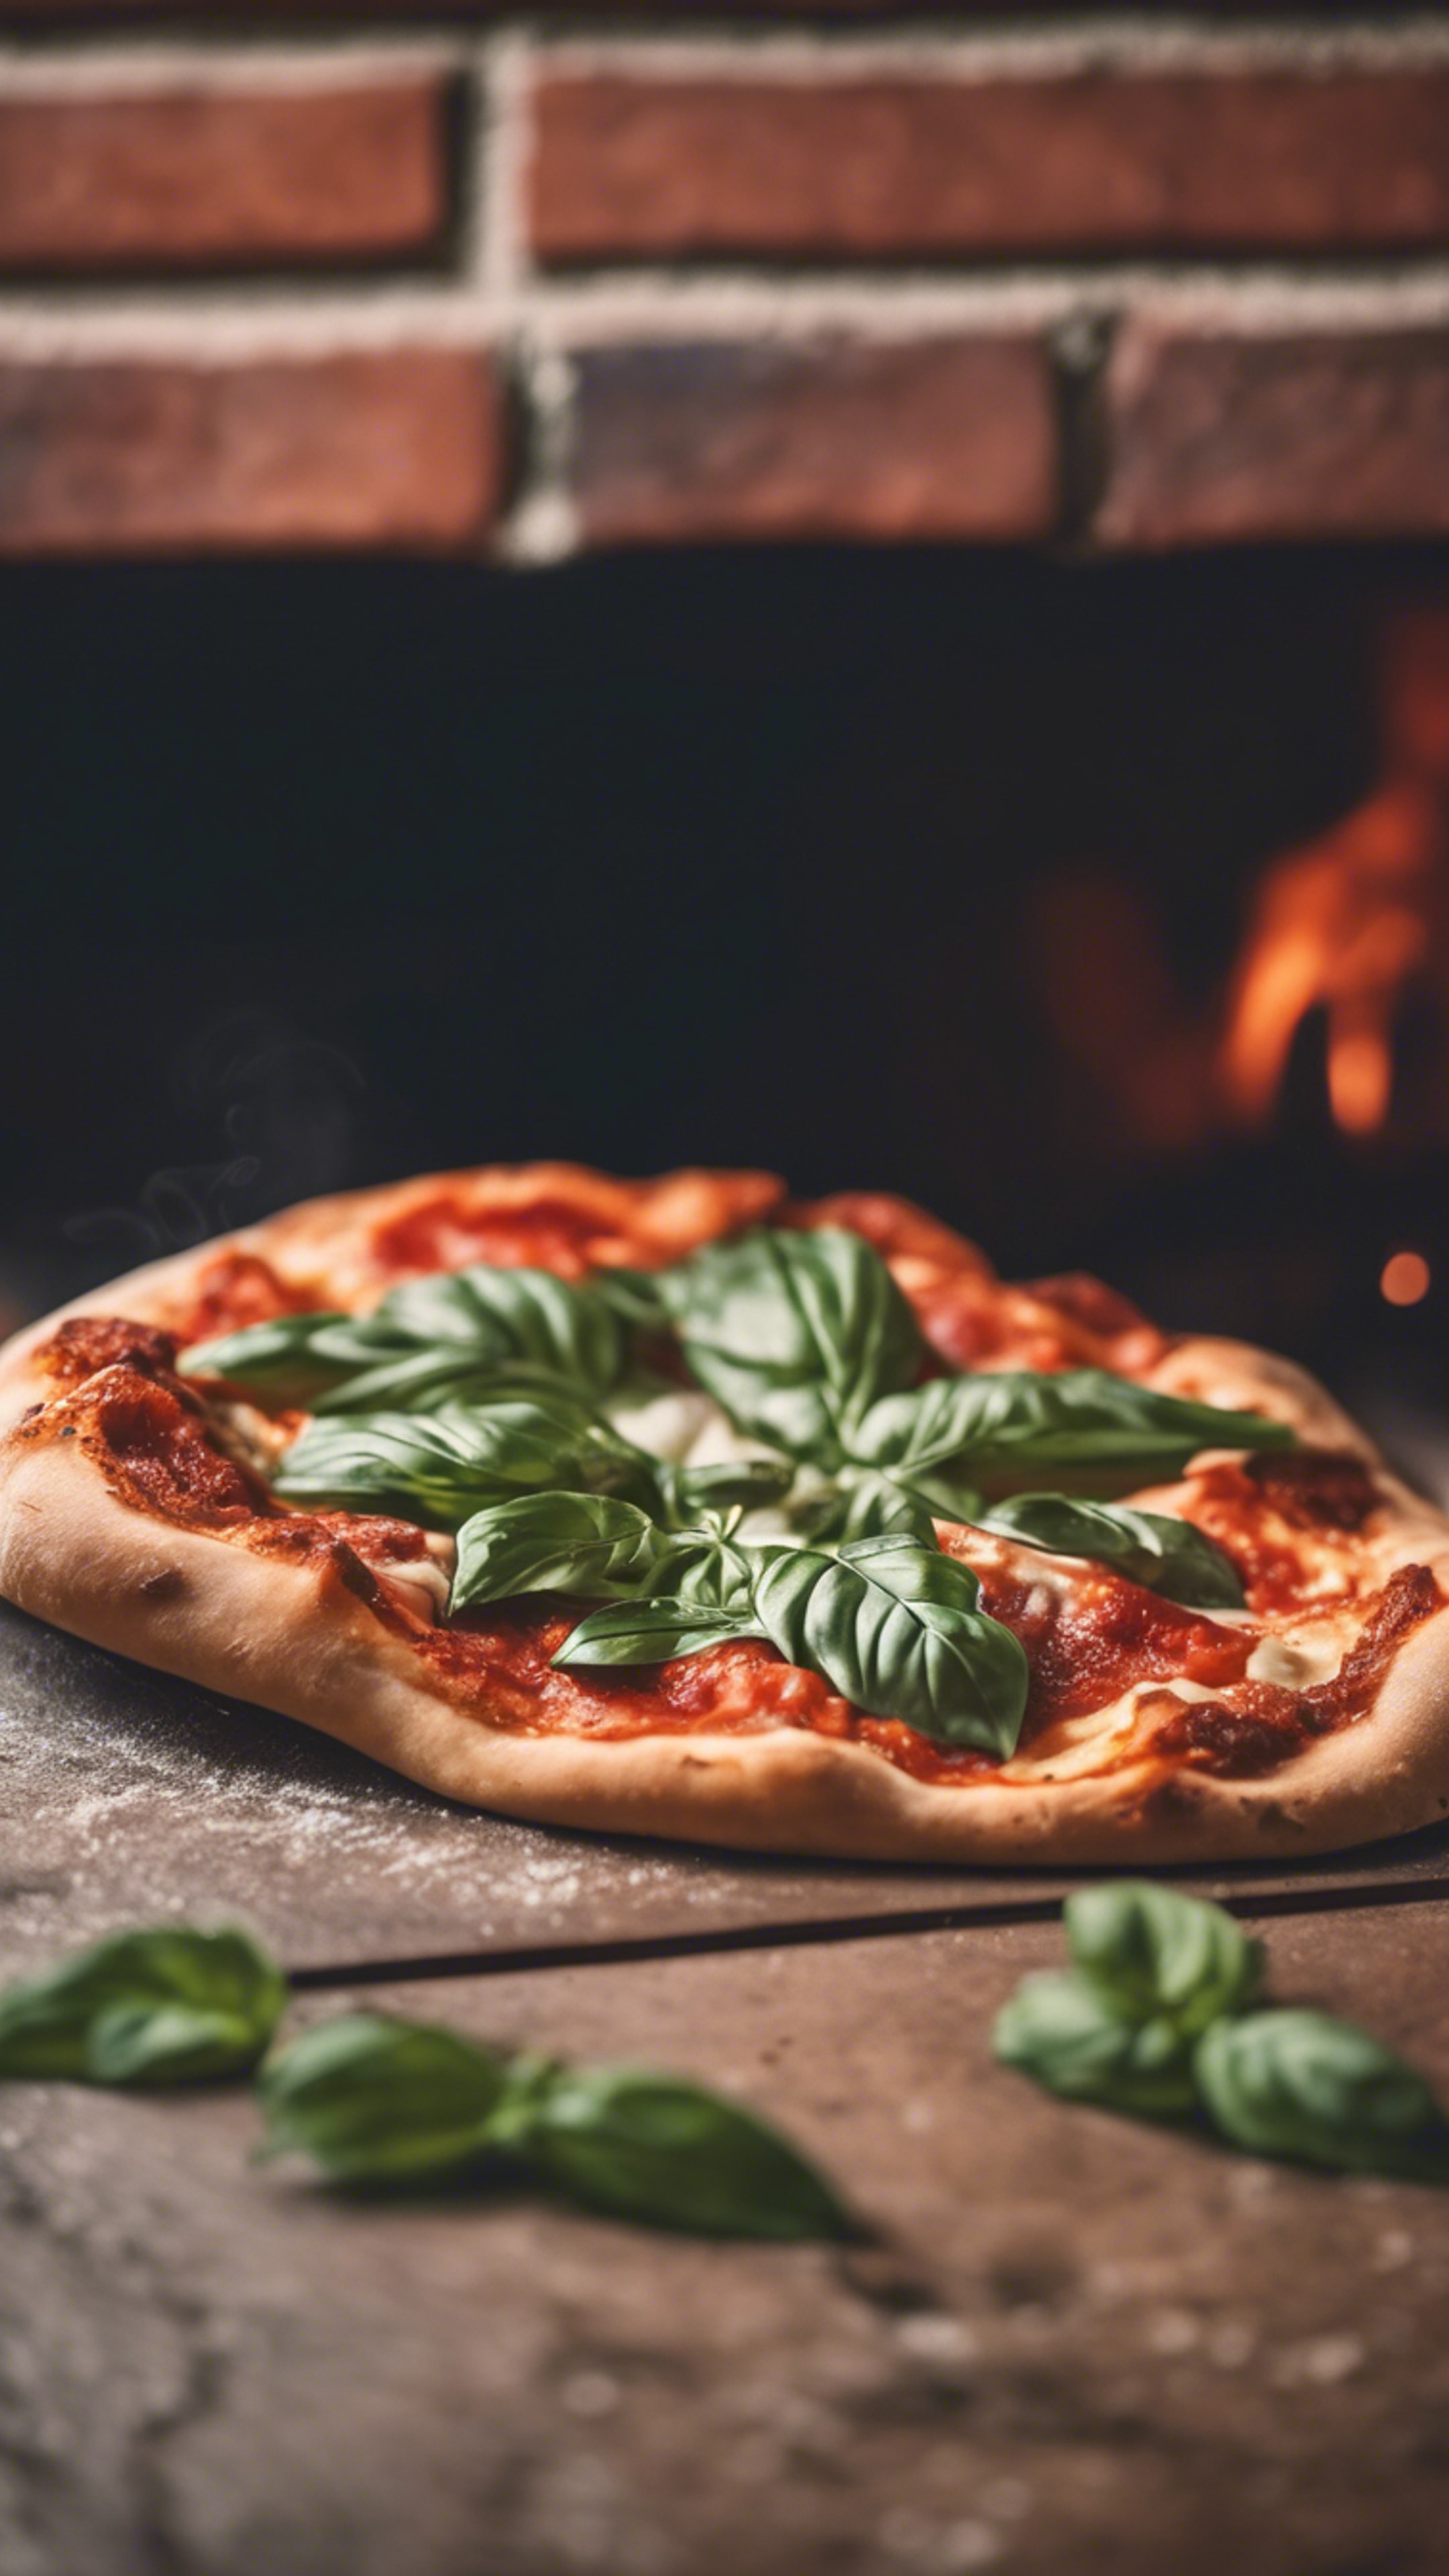 A classic Neapolitan pizza with whole basil leaves being baked in an antique brick oven.壁紙[7bb37e653cbf4aa7b39e]